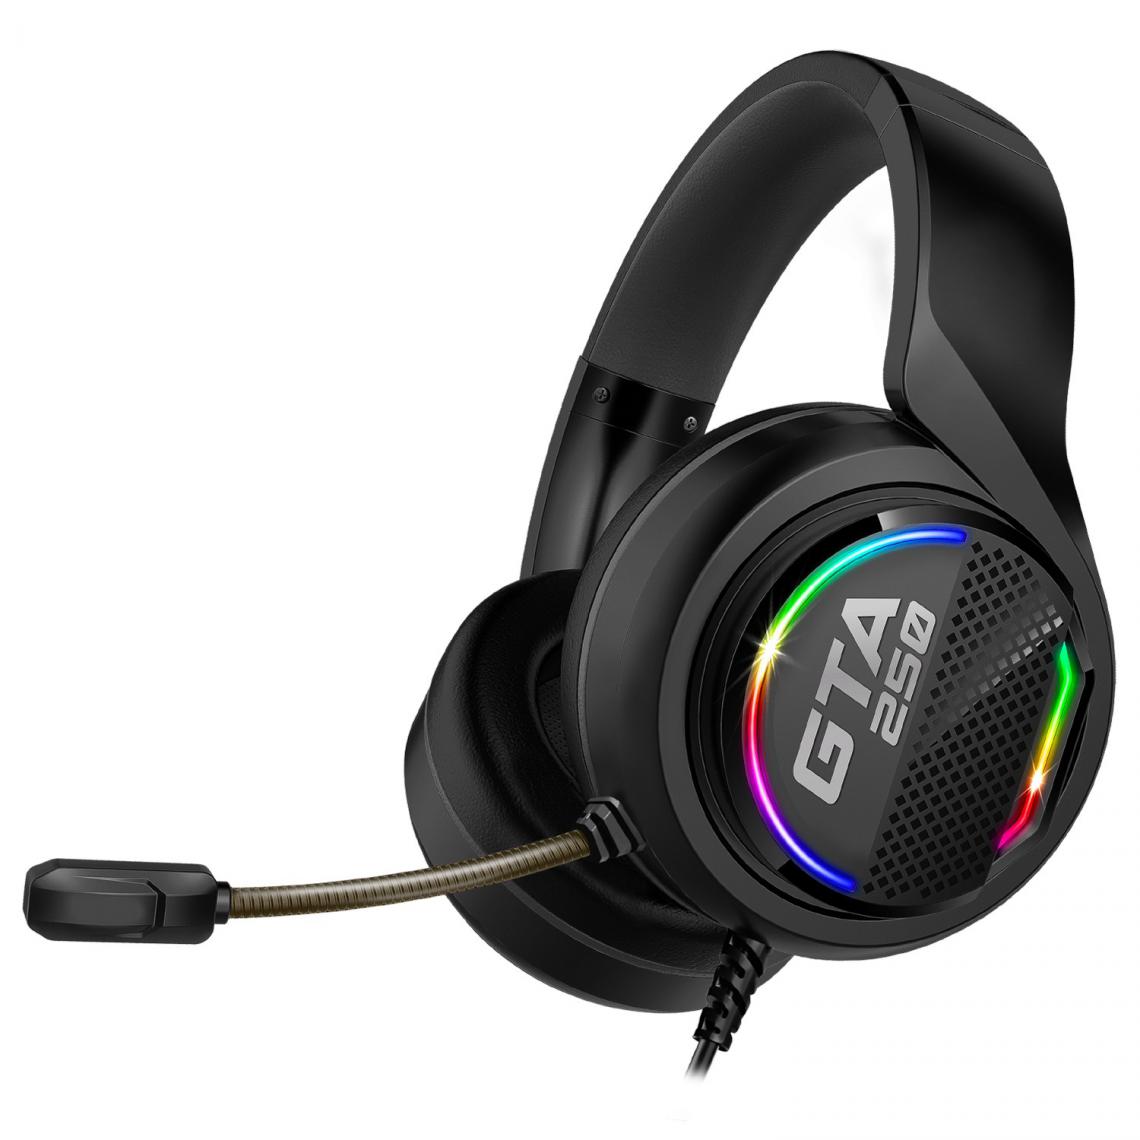 Spirit Of Gamers - Casque-micro - son surround virtuel 7.1 - microphone omnidirectionnel - RGB - compatible PC/PS4 - Micro-Casque